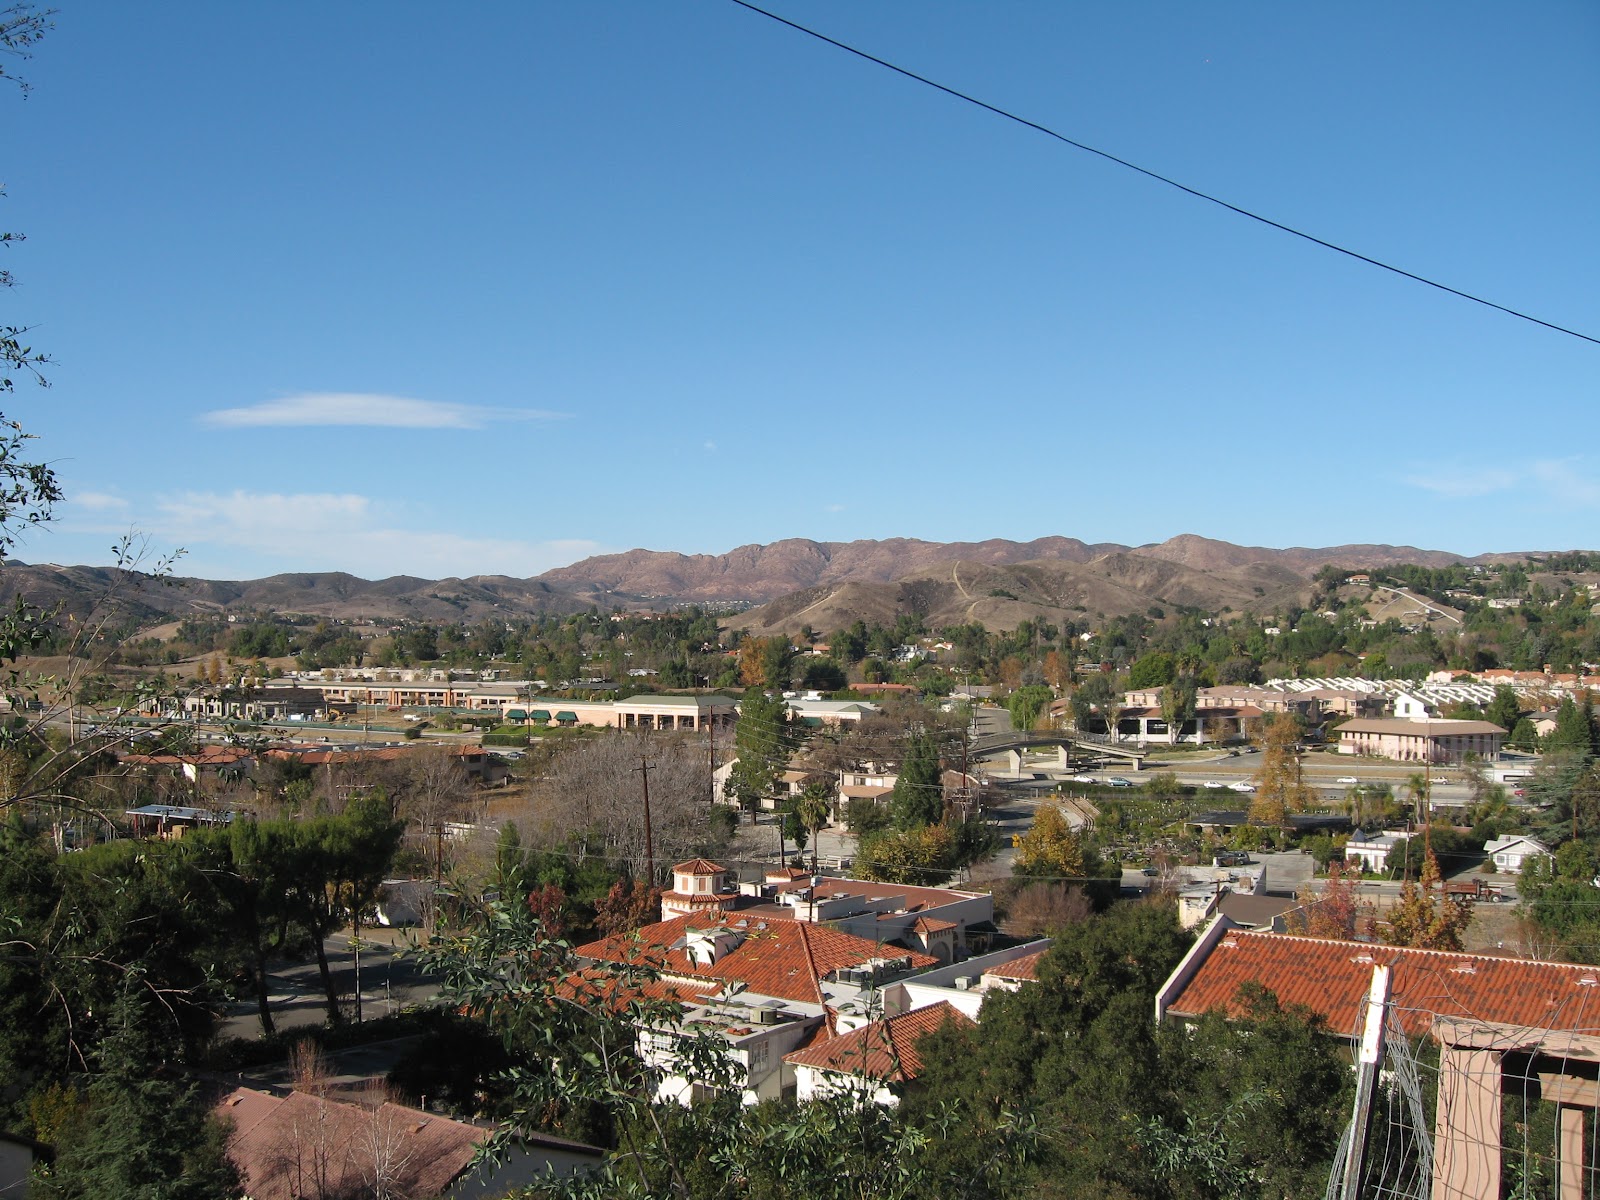 Agoura hills :- PLaces to Visit.